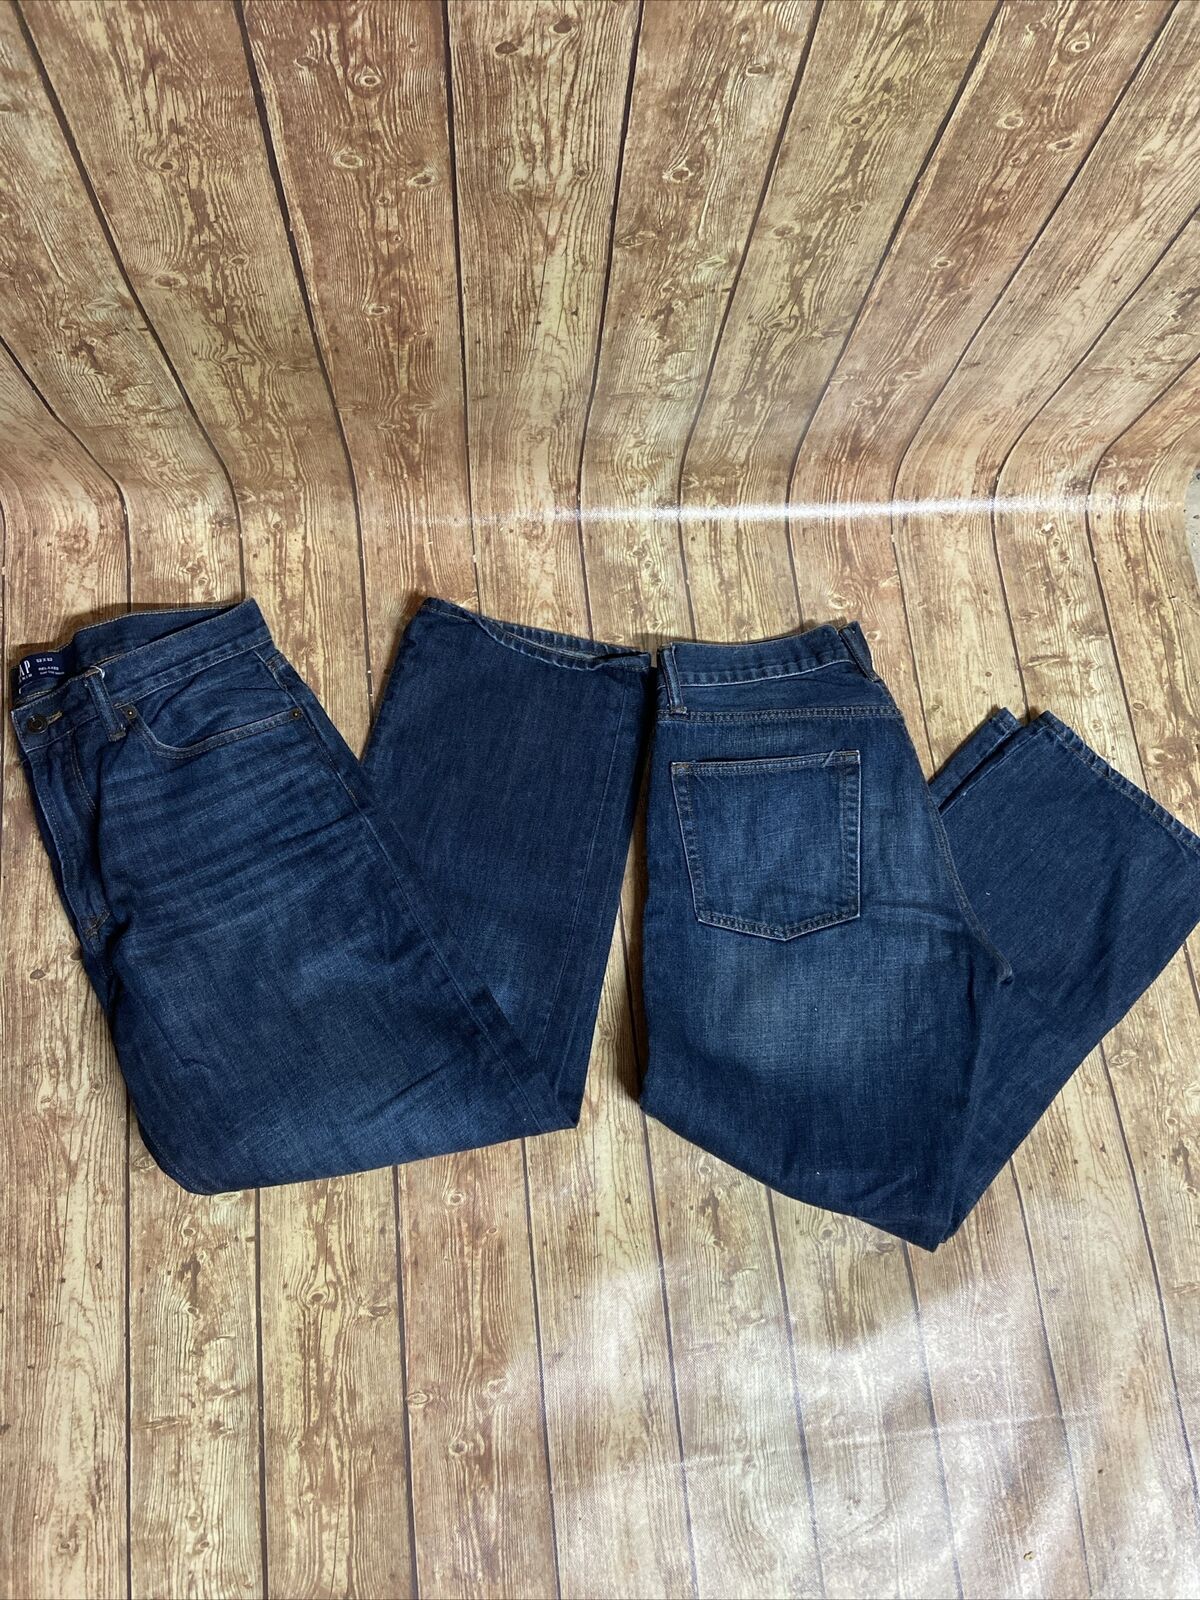 Gap Men’s Jeans 32x32 Relaxed Dark Wash Lot Of 2 … - image 1